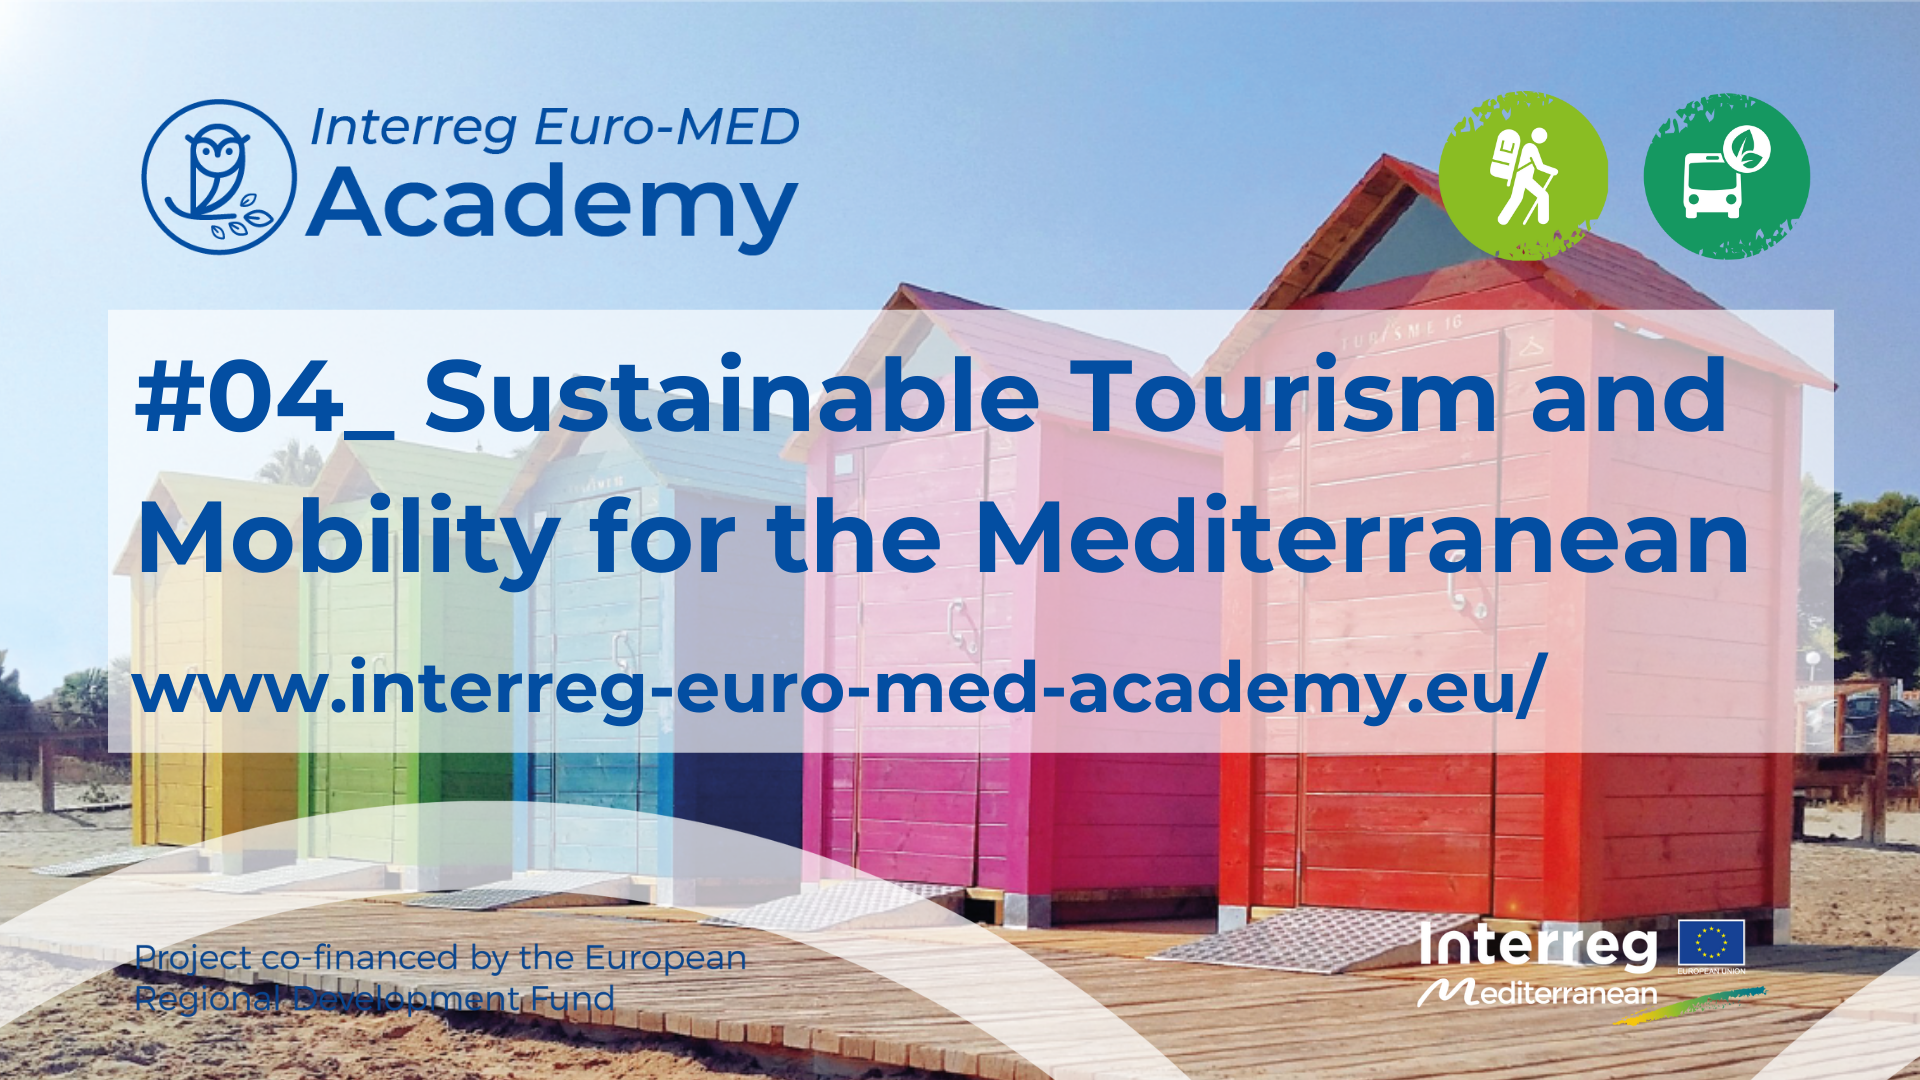 #04 Sustainable Tourism and Mobility in the Mediterranean > Registration is opened 